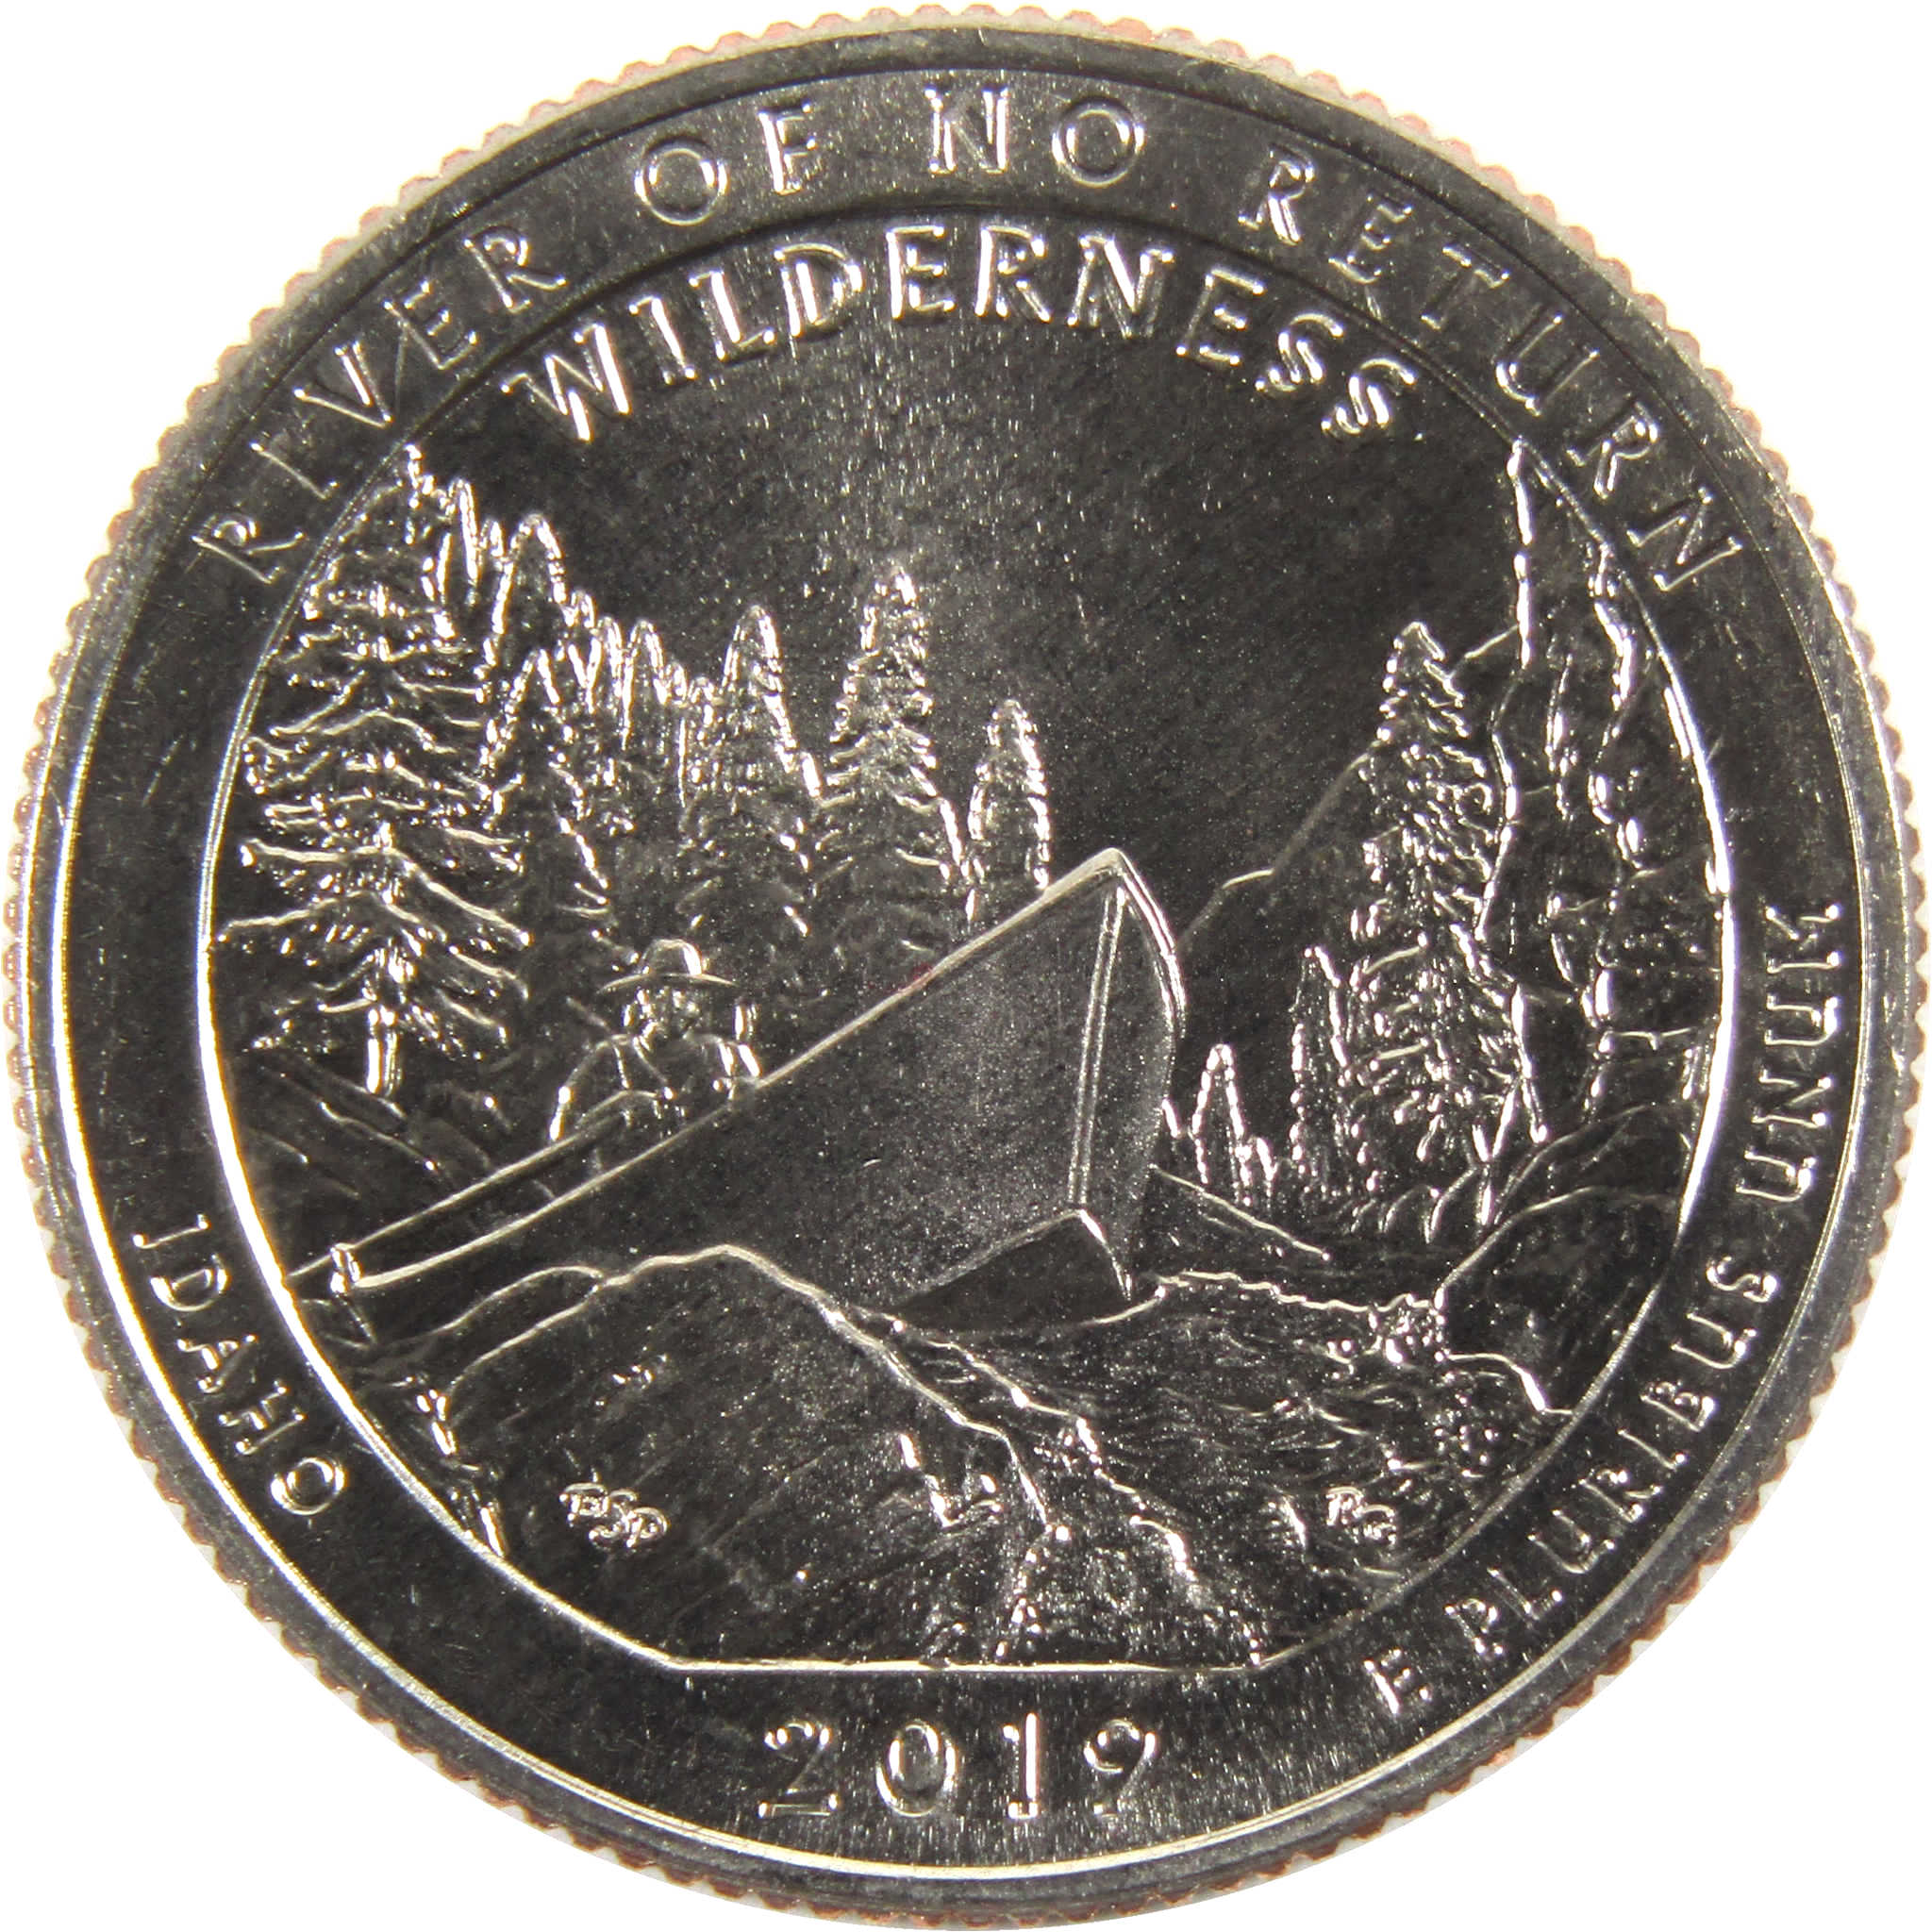 2019 S Frank Church River National Park Quarter Uncirculated Clad Coin